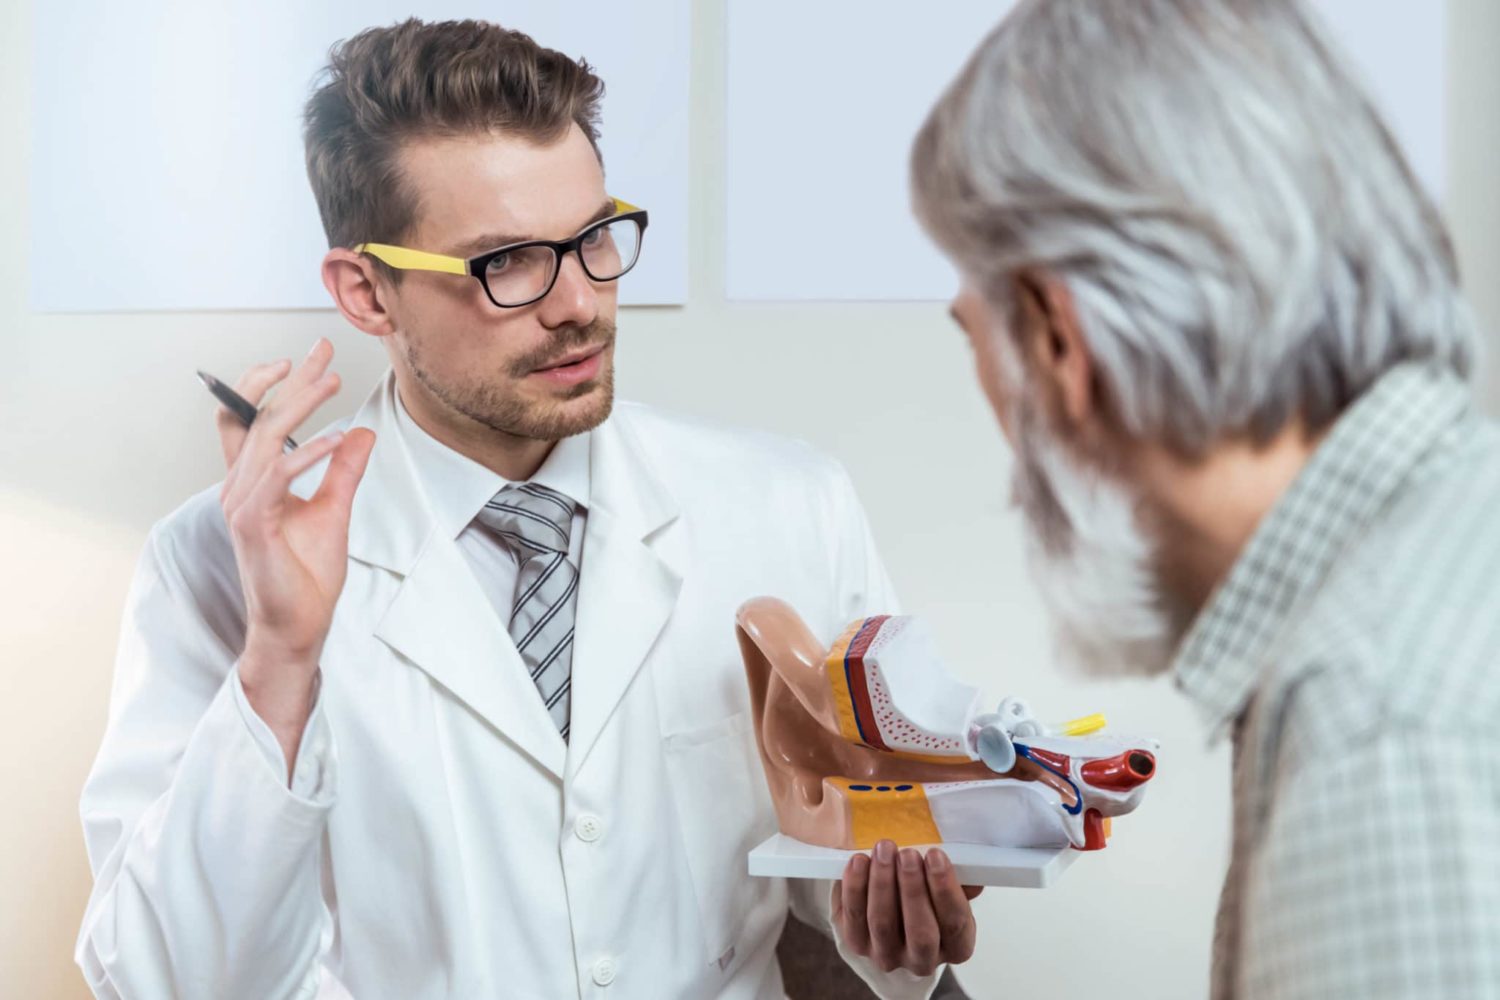 An audiologist shows a male patient a model of an ear at a hearing clinic in the St. Louis, MO area.